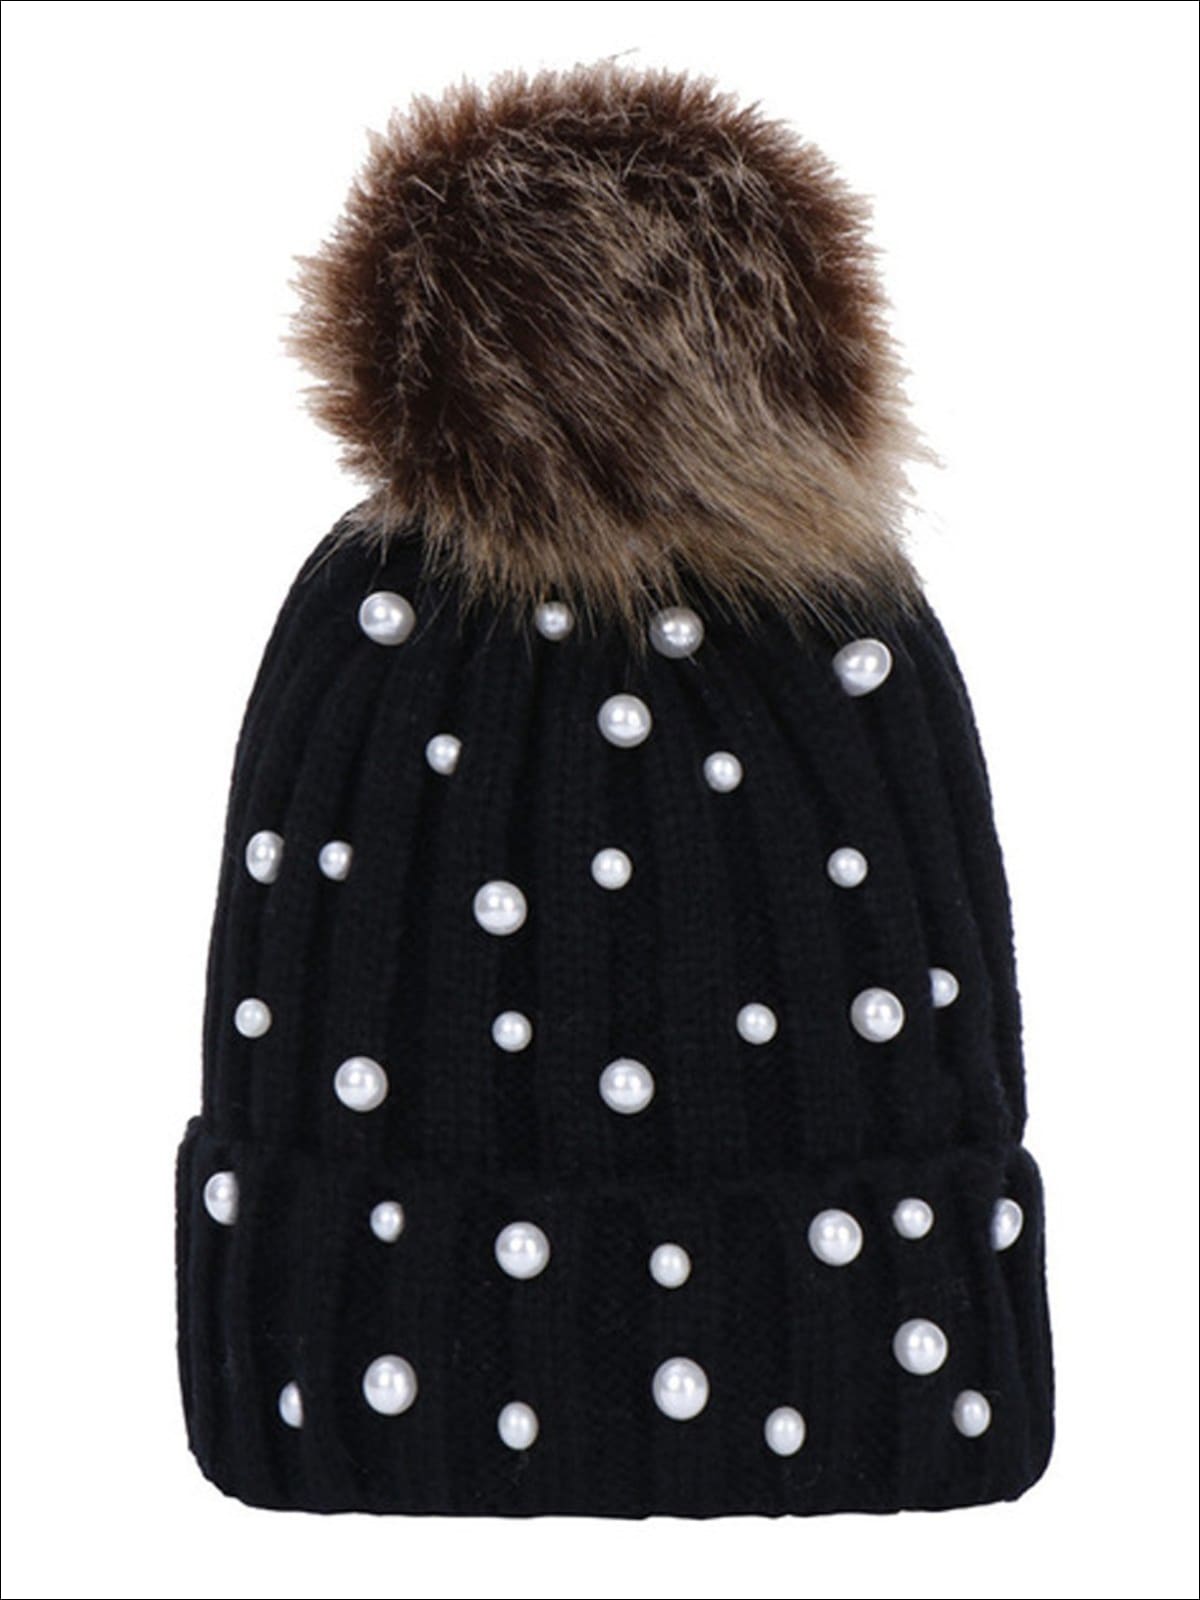 Girls Cable Knit Pearl Embellished Winter Beanie - Black - Girls Hats